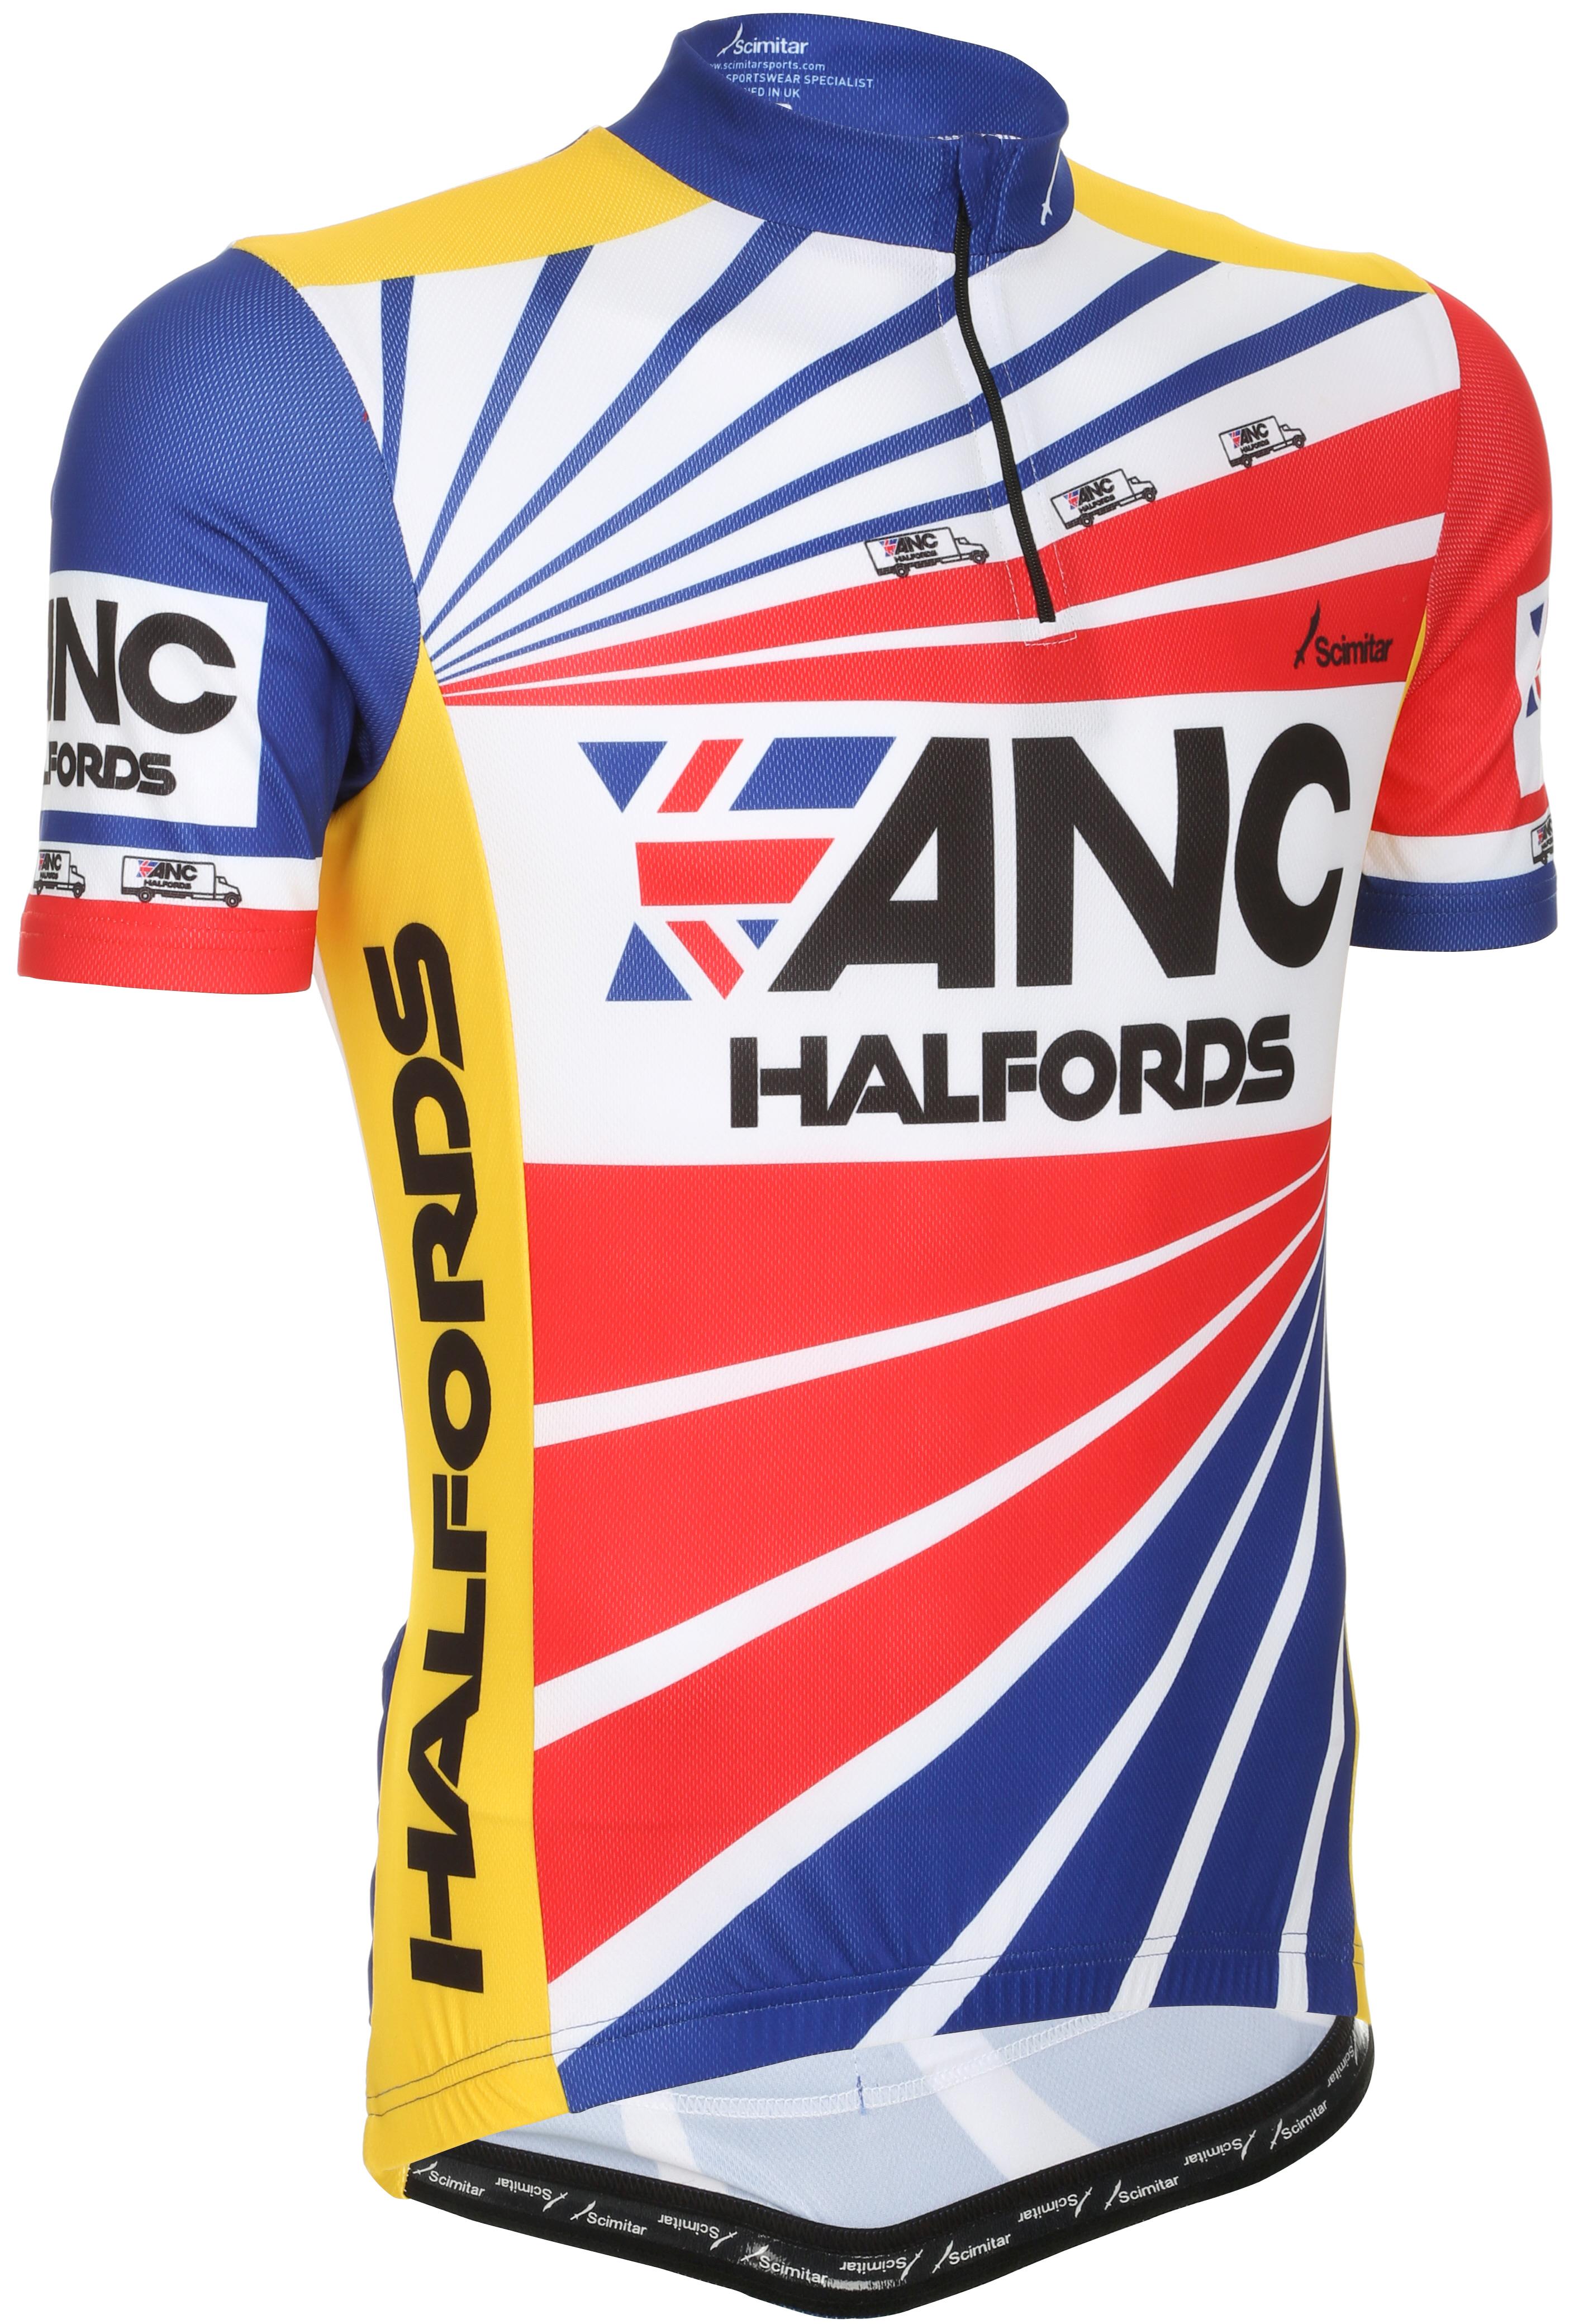 anc halfords jersey